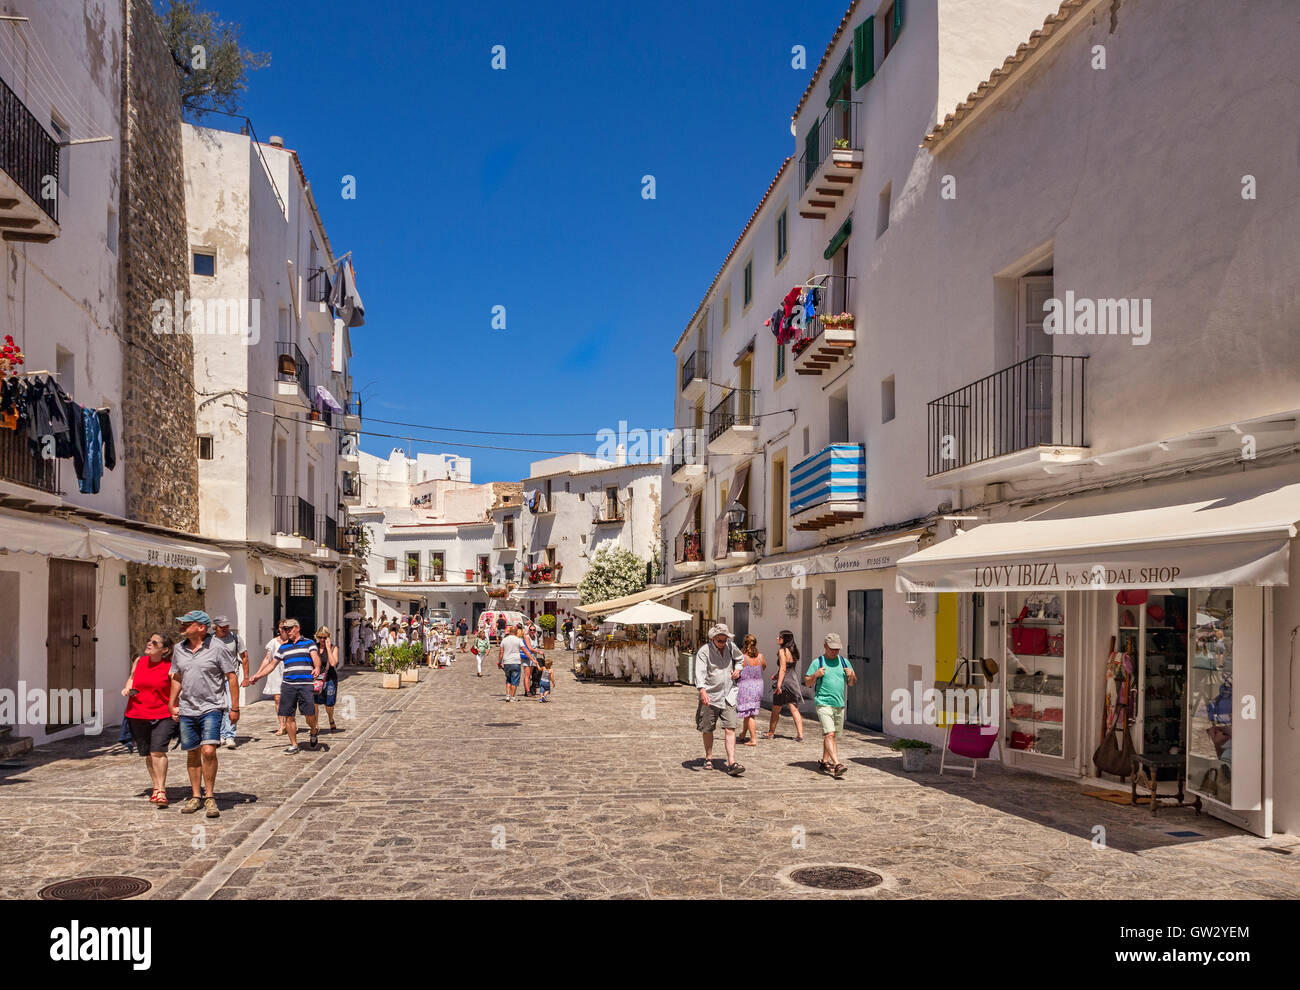 Shopping in Ibiza old town, Spain. Stock Photo